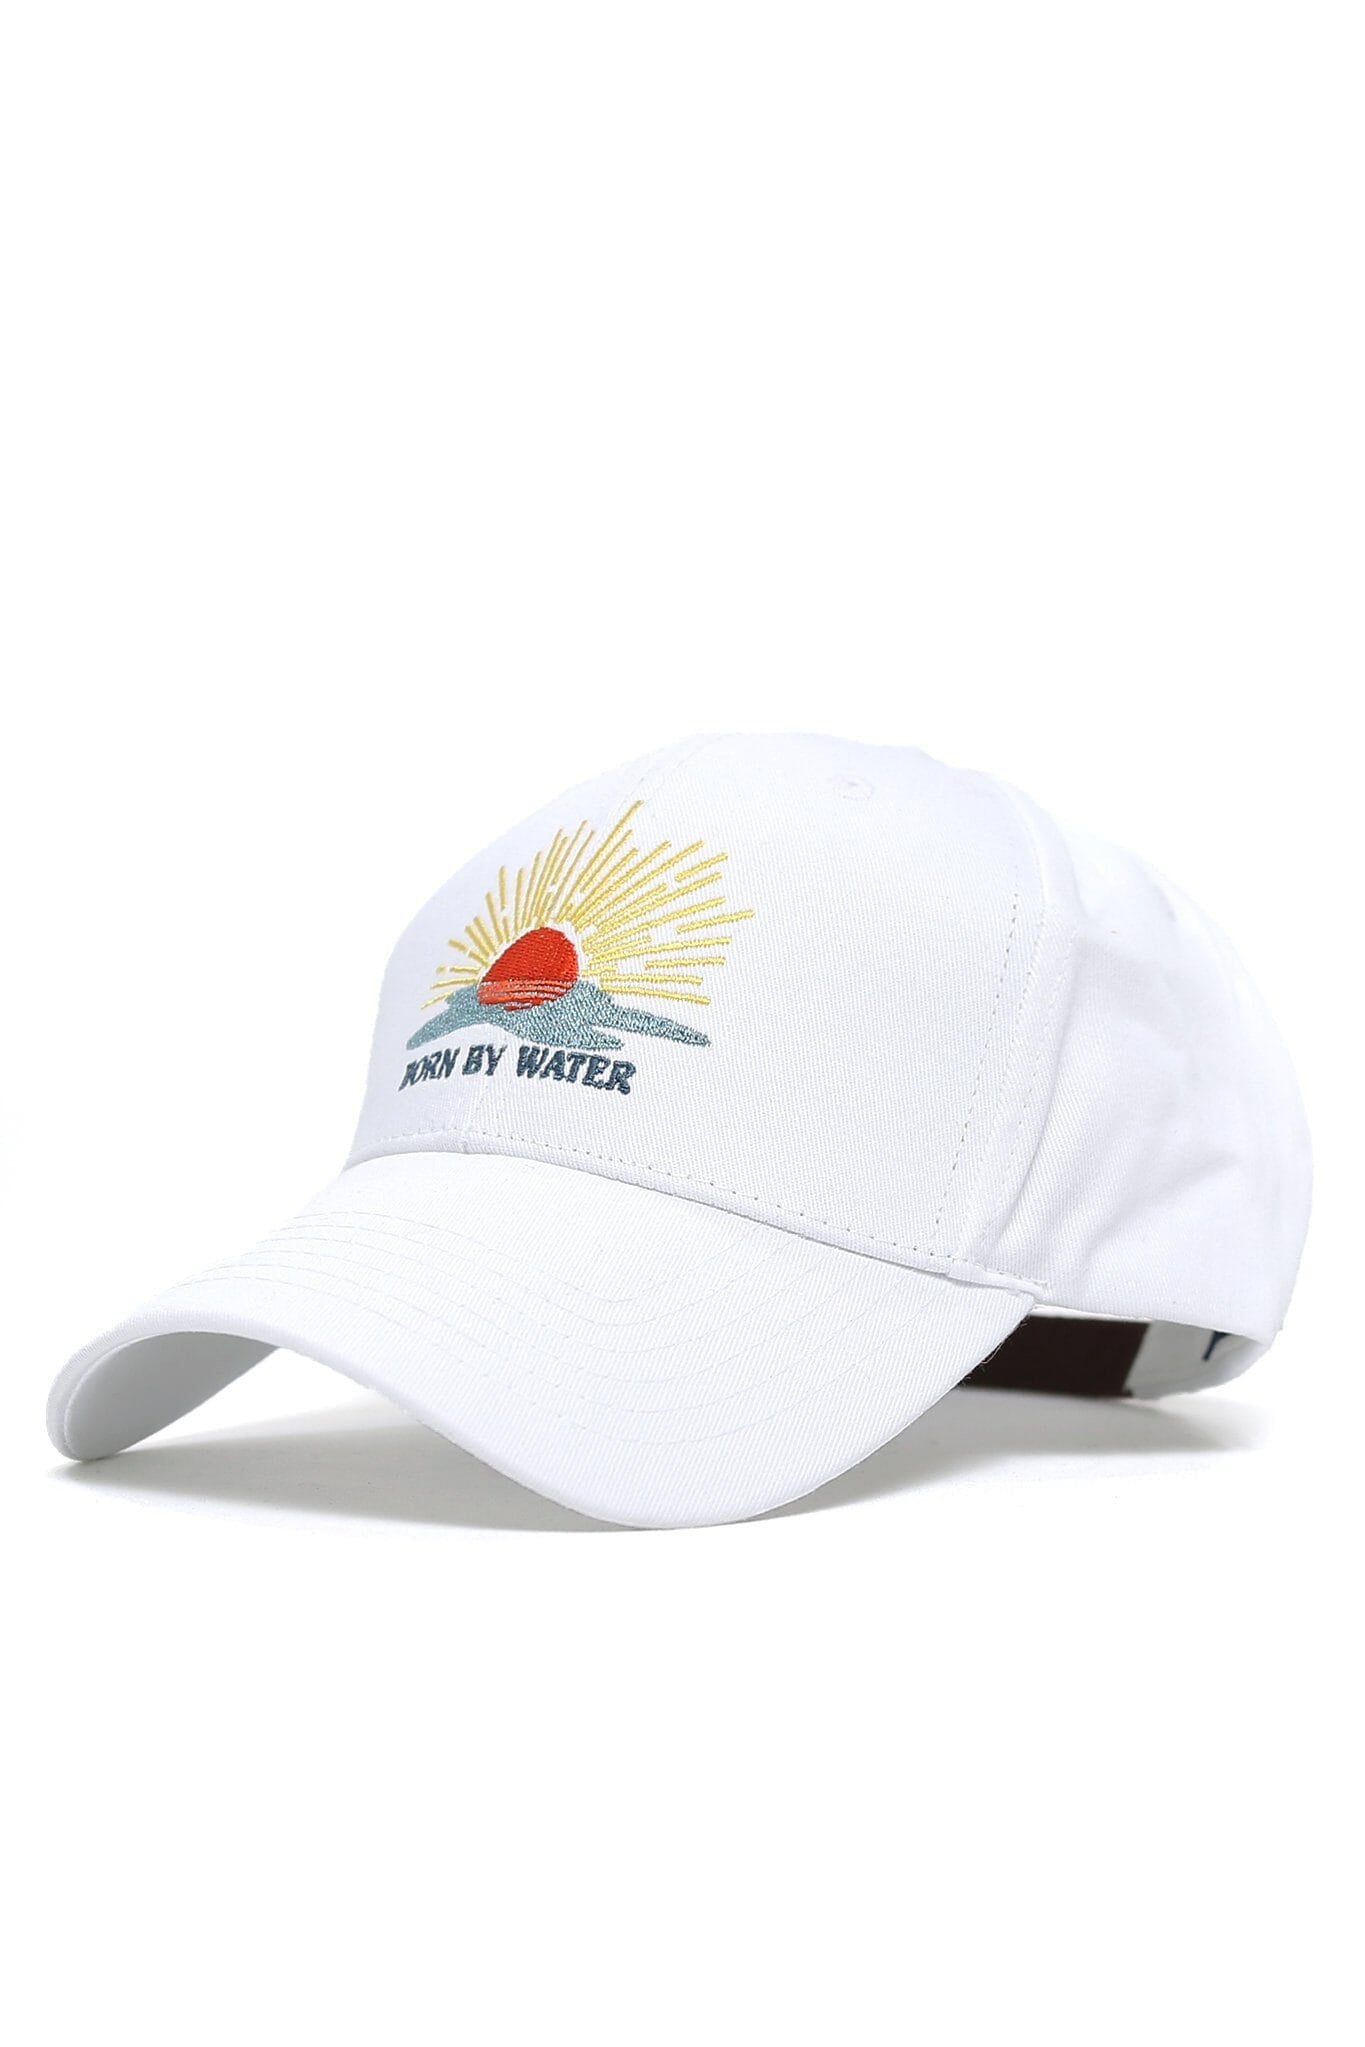 BORN BY WATER SUNSET CAP - W-WHITE - OS